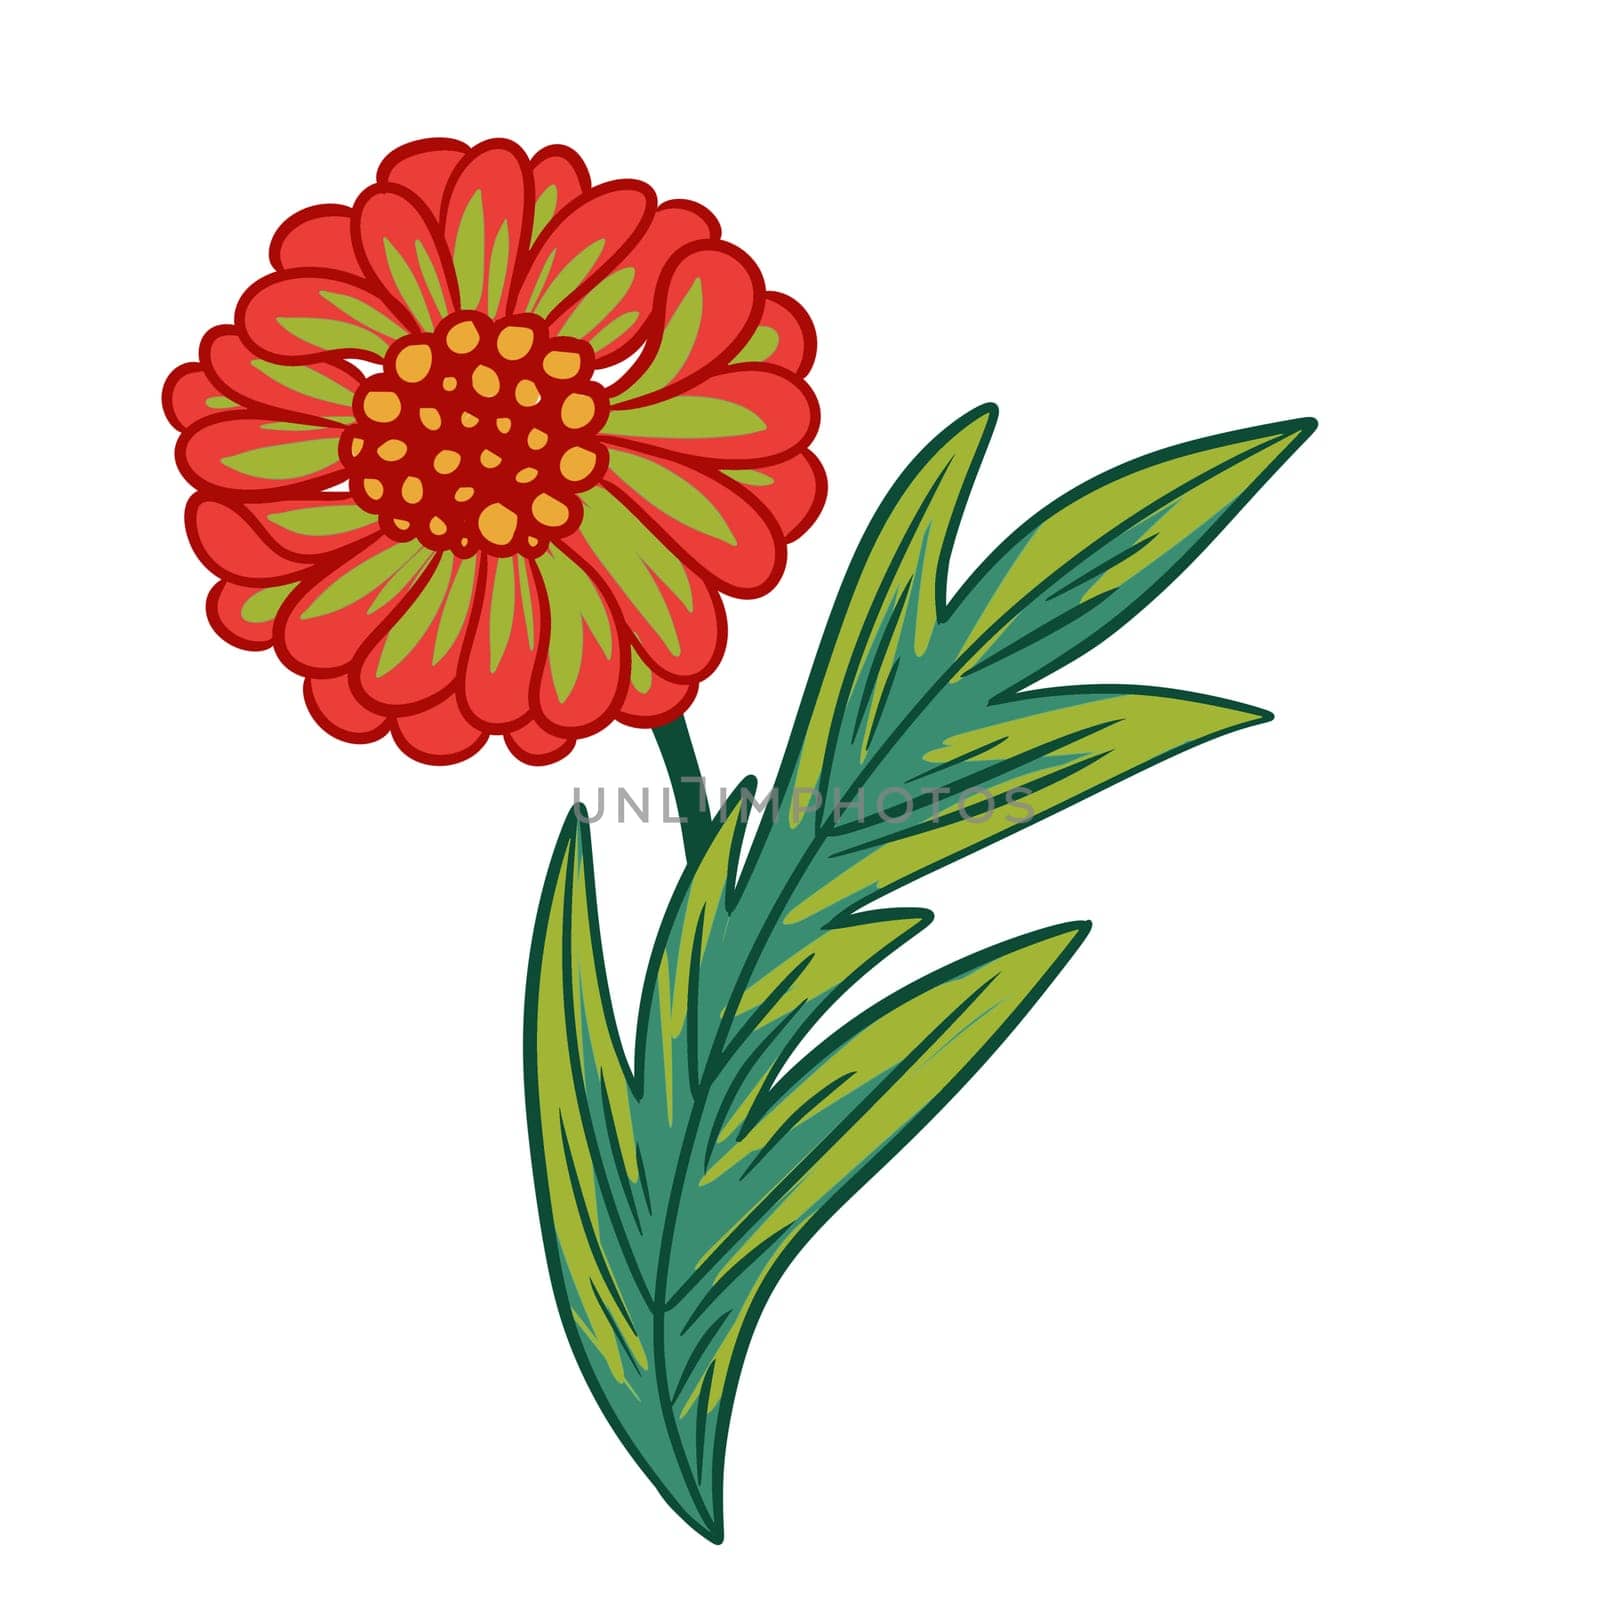 Hand drawn illustration of orange green zinnia daisy daisy flowers leaves on white isolated background. Bright colorful retro vintage print design, 60s 70s floral art, nature plant bloom blossom.. by Lagmar